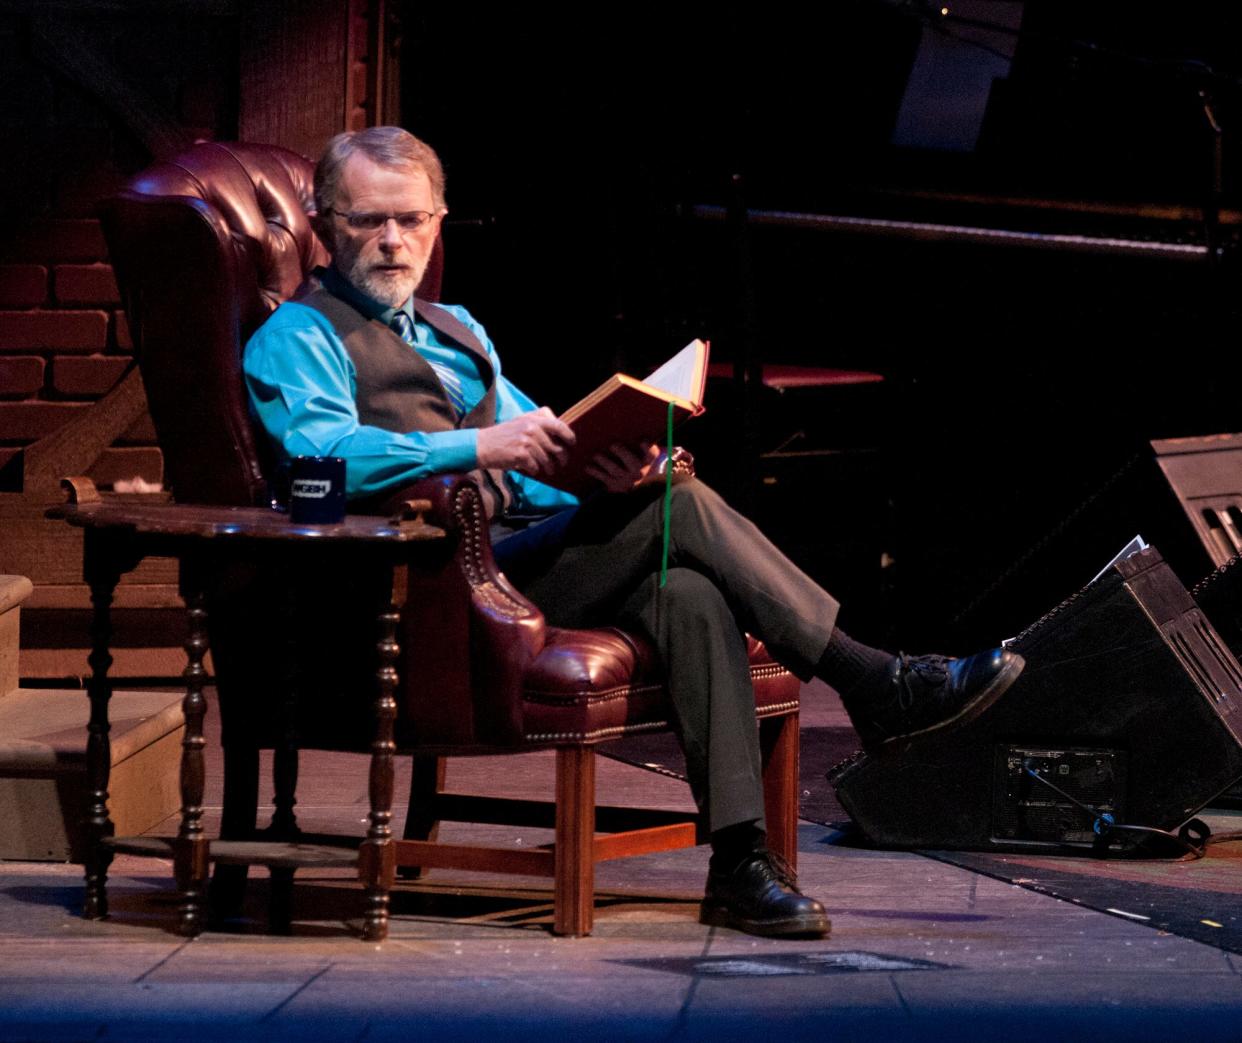 Brian O'Donovan reads a poem on stage at the Hanover Theatre during a past installment of "A Celtic Sojourn."